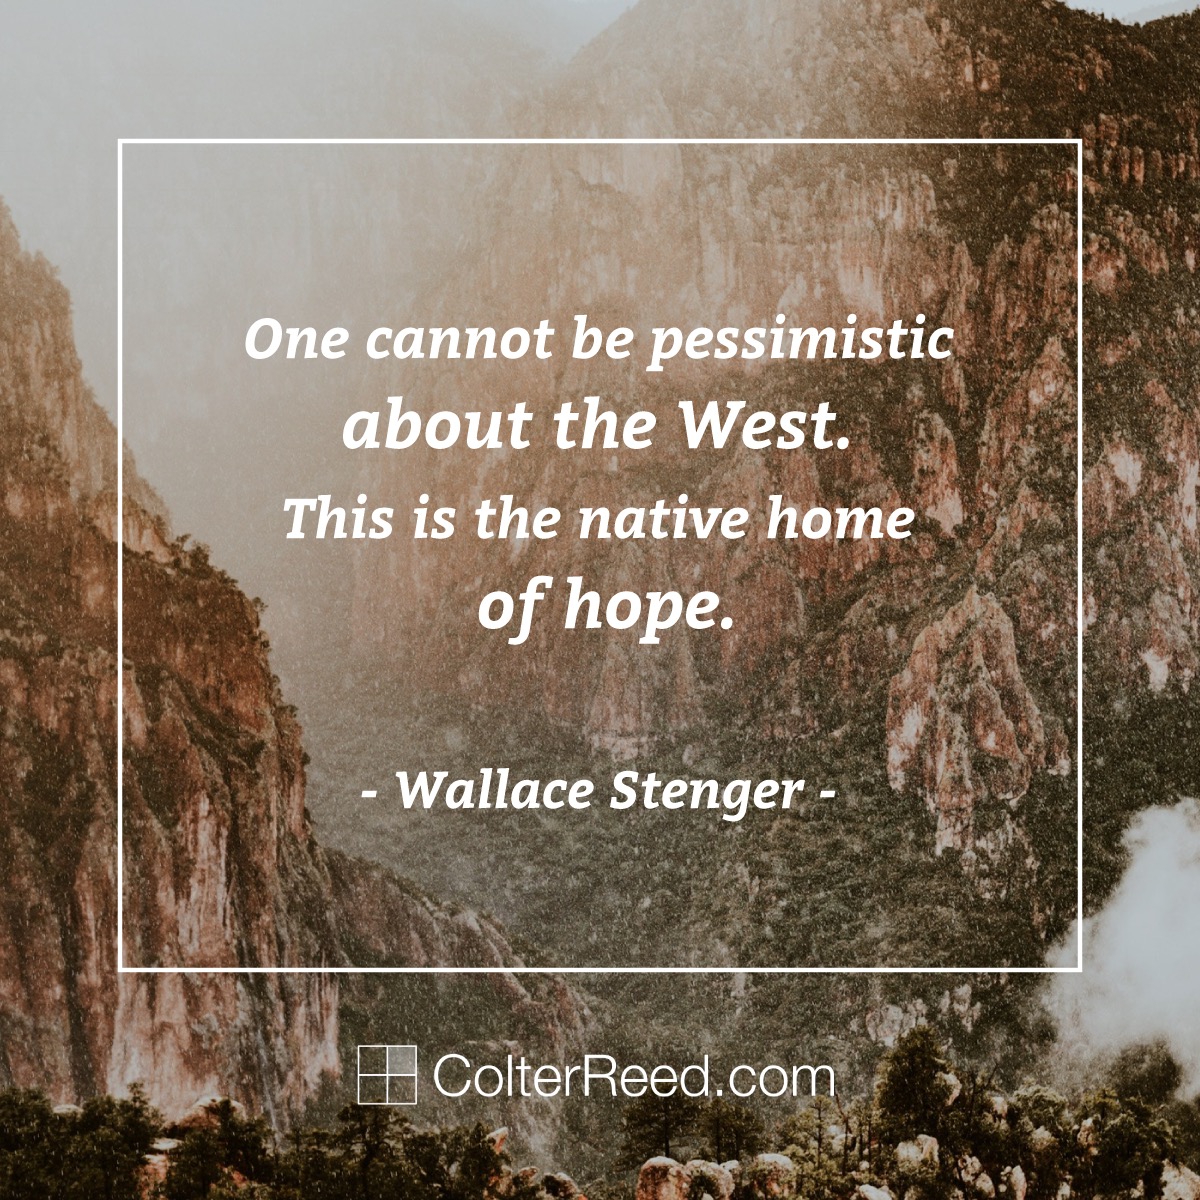 One cannot be pessimistic about the West. This is the native home of hope. —Wallace Stenger